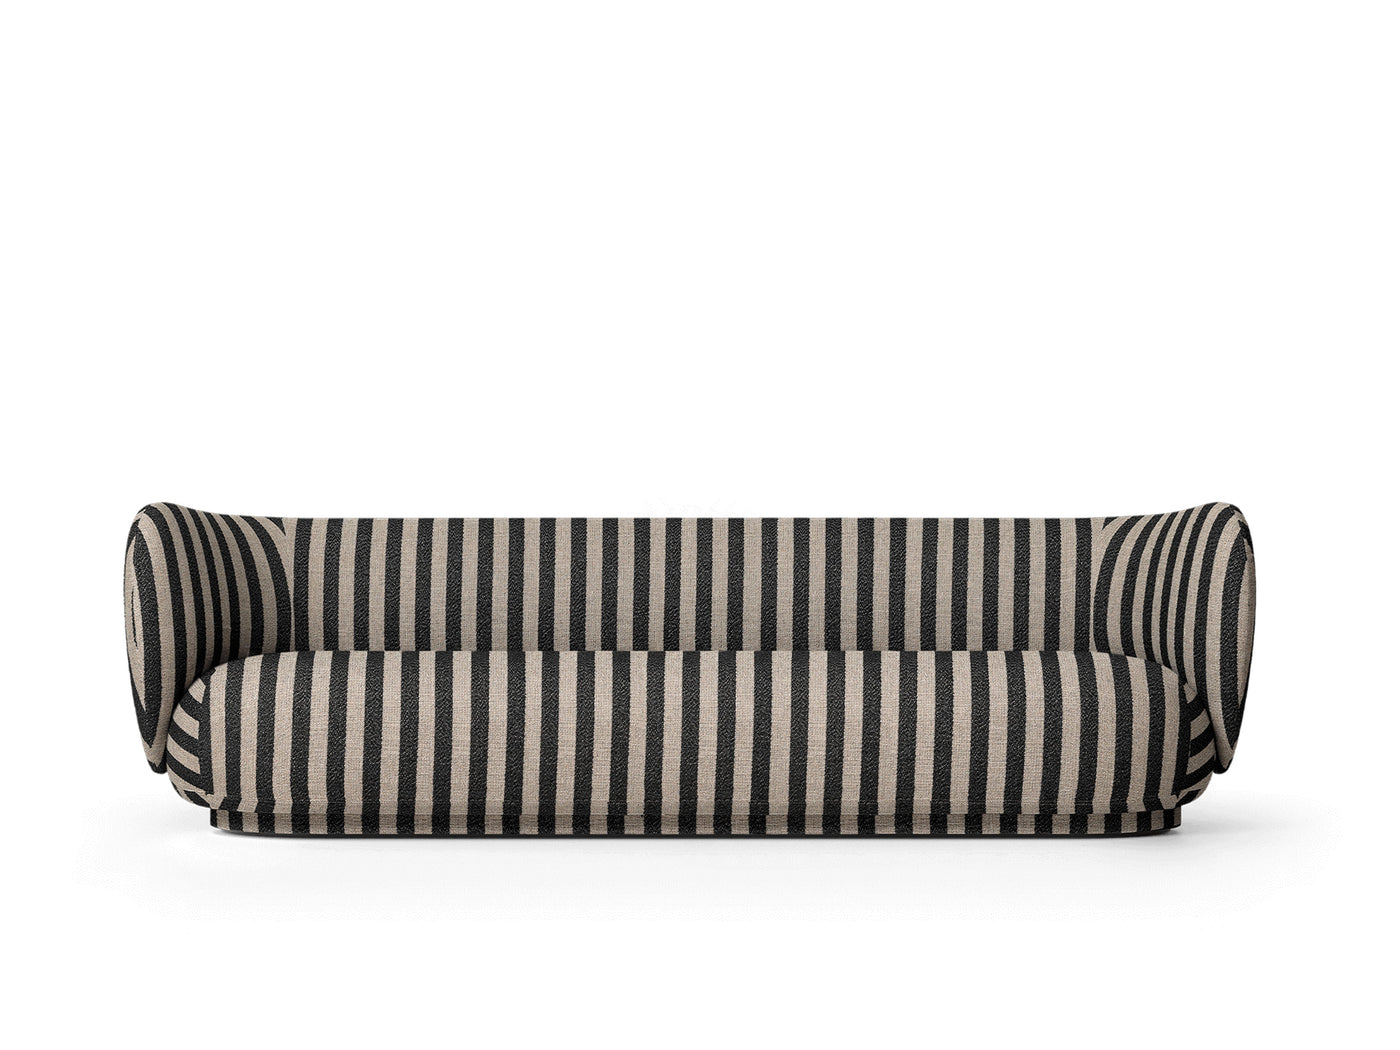 ferm LIVING Rico 4 seater sofa. Made to order from someday designs. #colour_louisiana